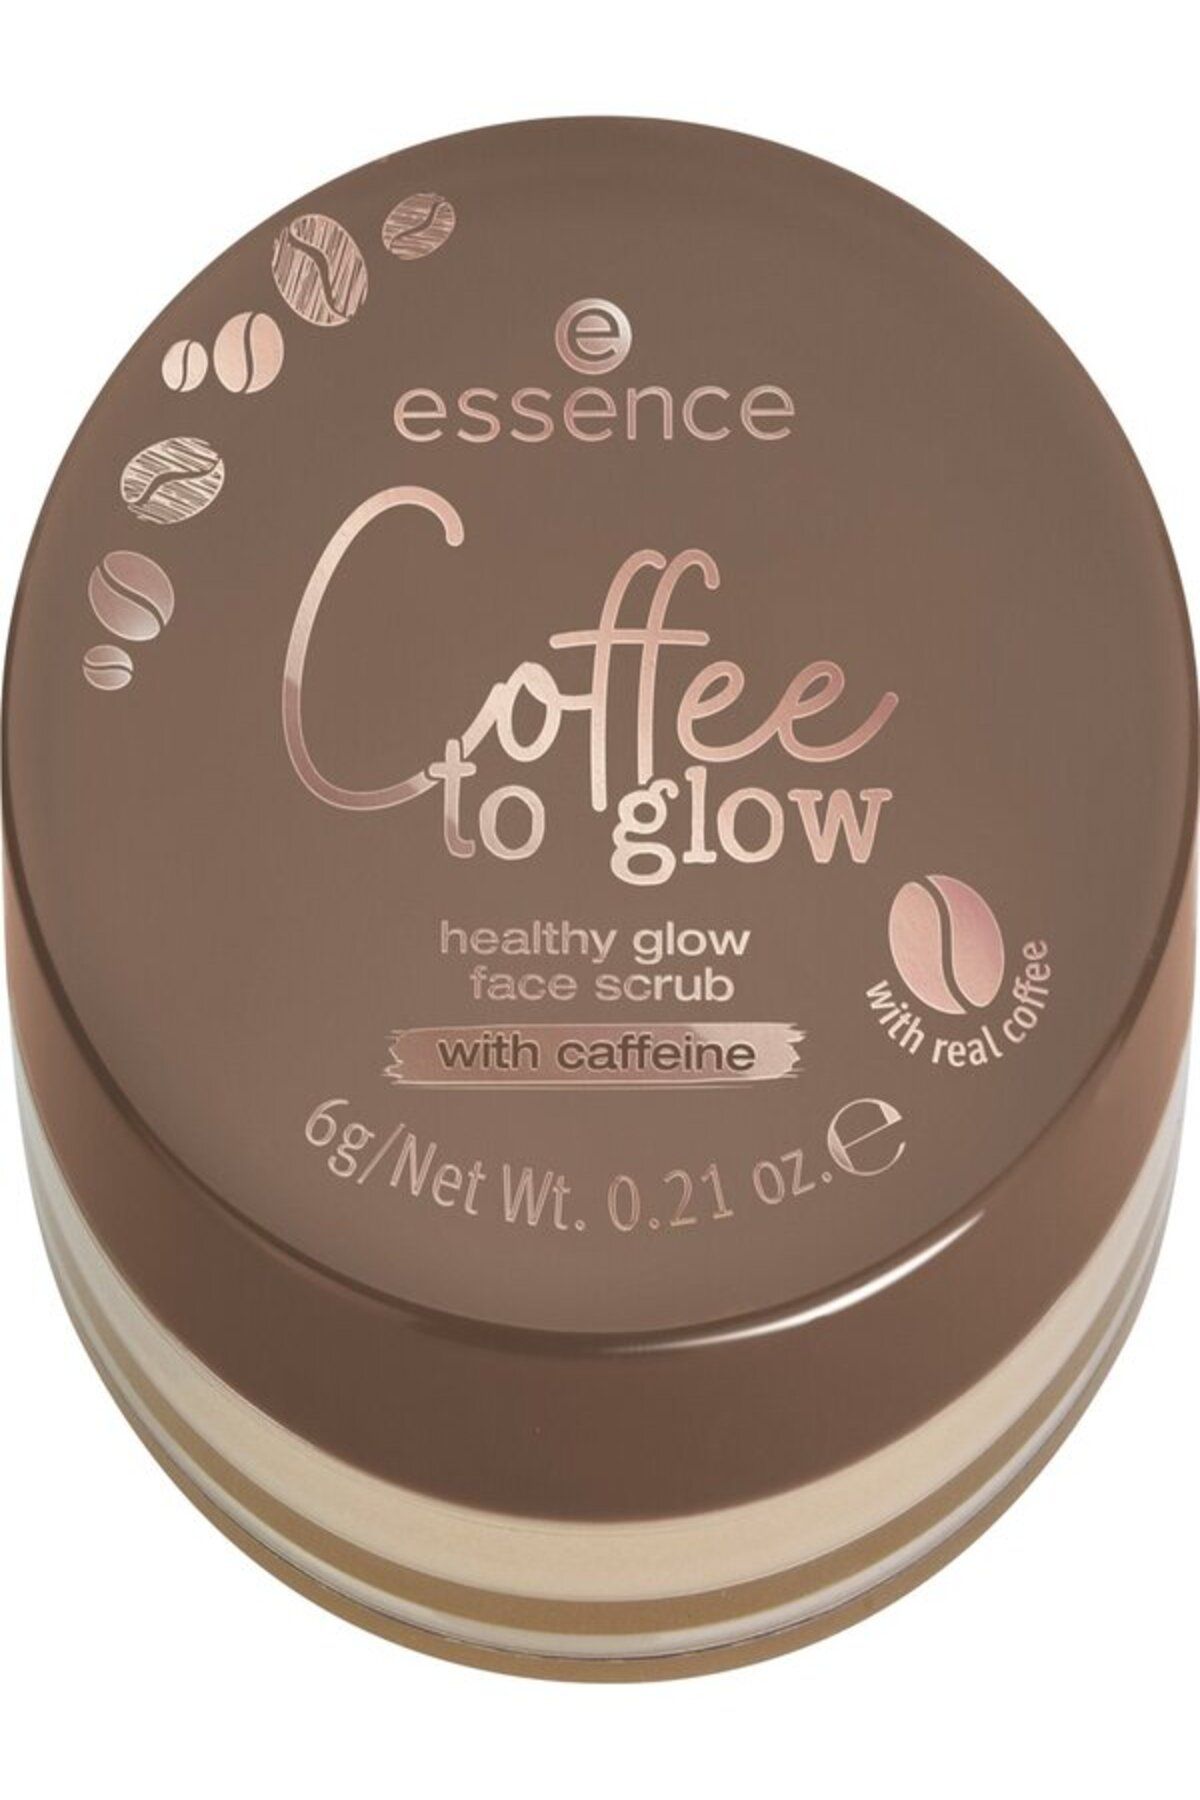 Essence Coffee to glow healthy glow face scrub 01 Never Stop Grinding! 6g